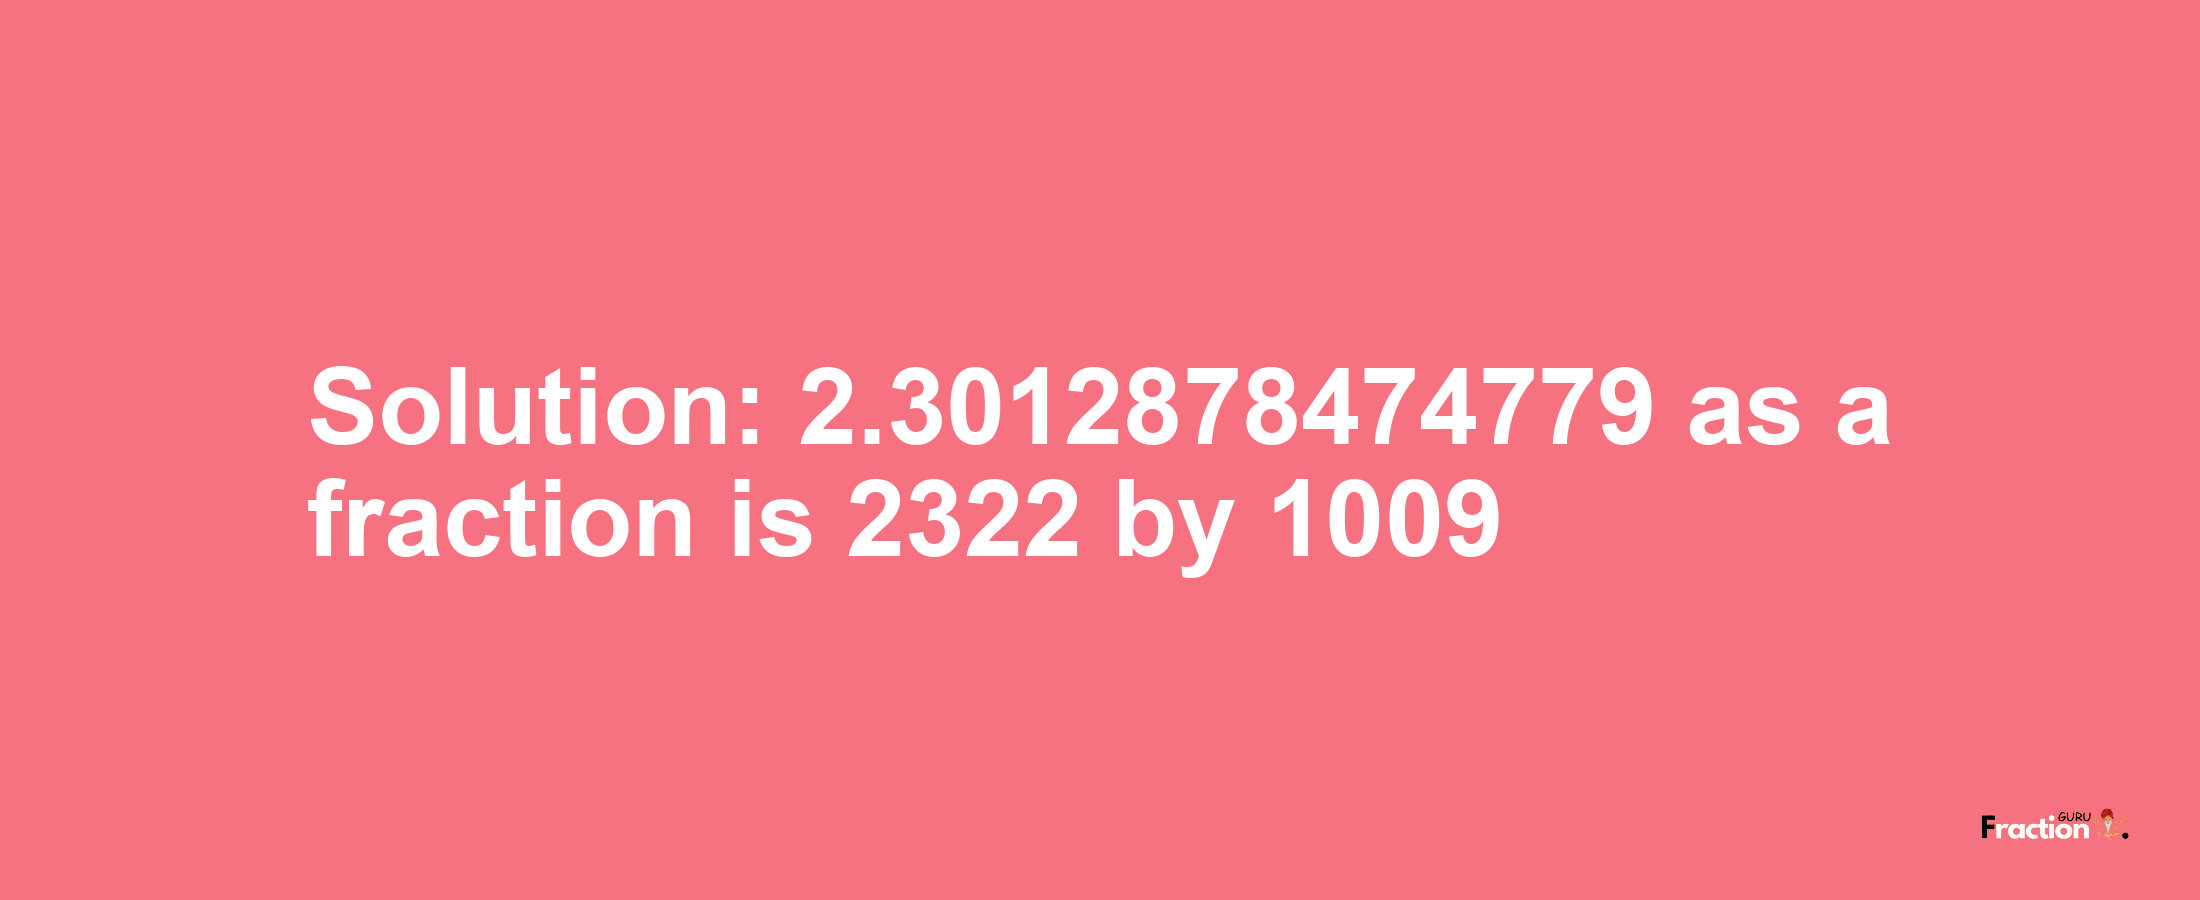 Solution:2.3012878474779 as a fraction is 2322/1009